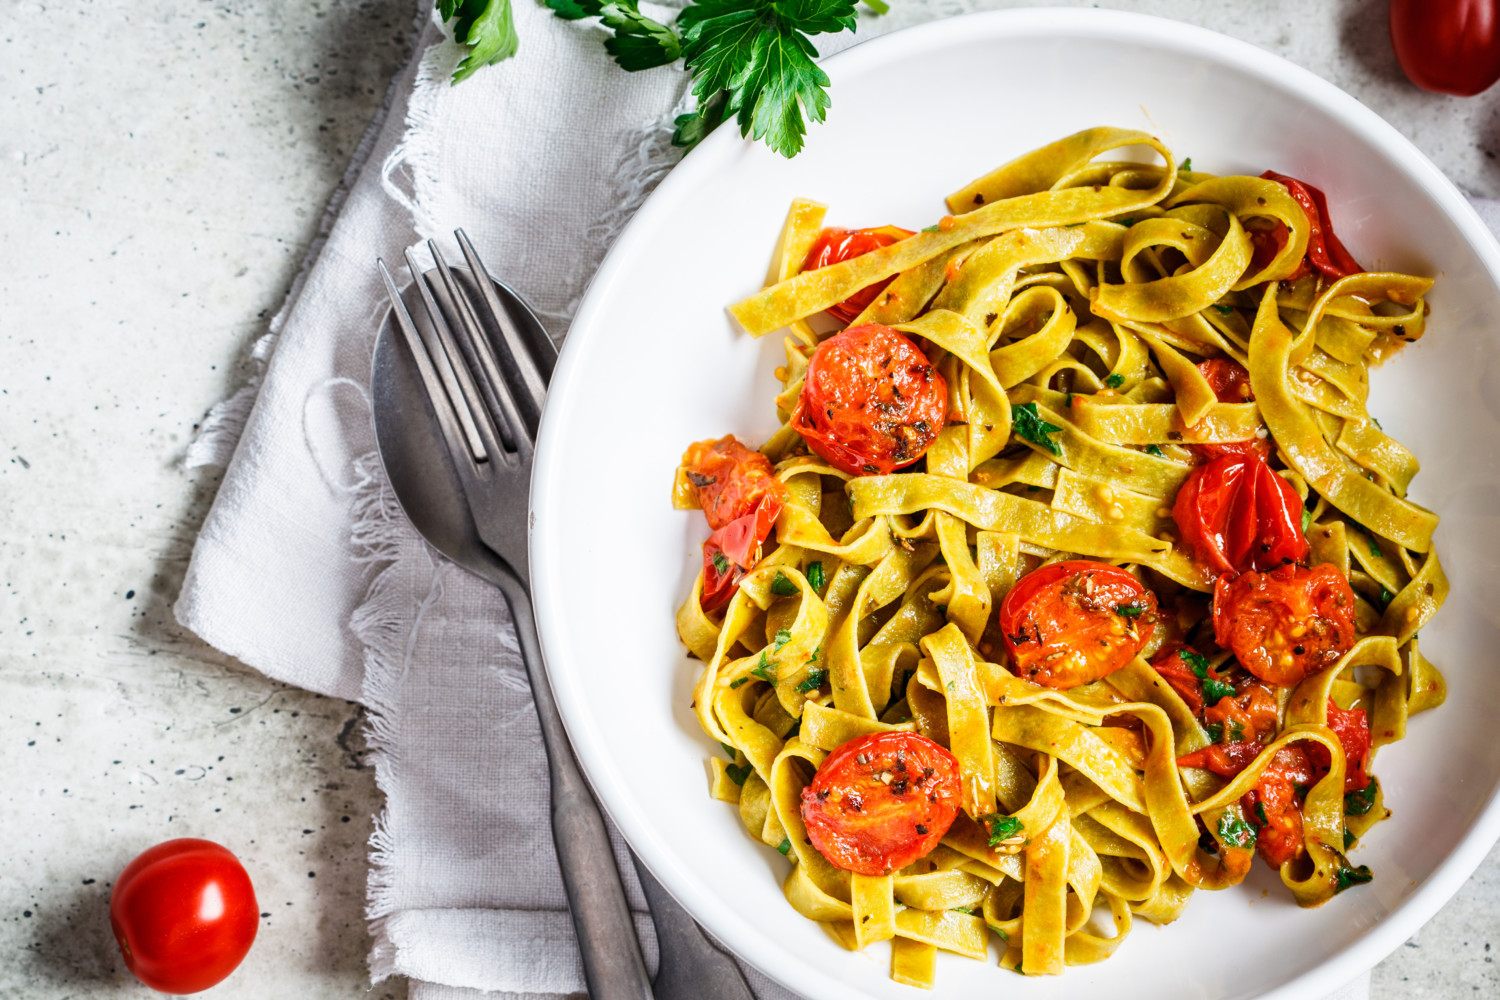 Spinach pasta with tomatoes